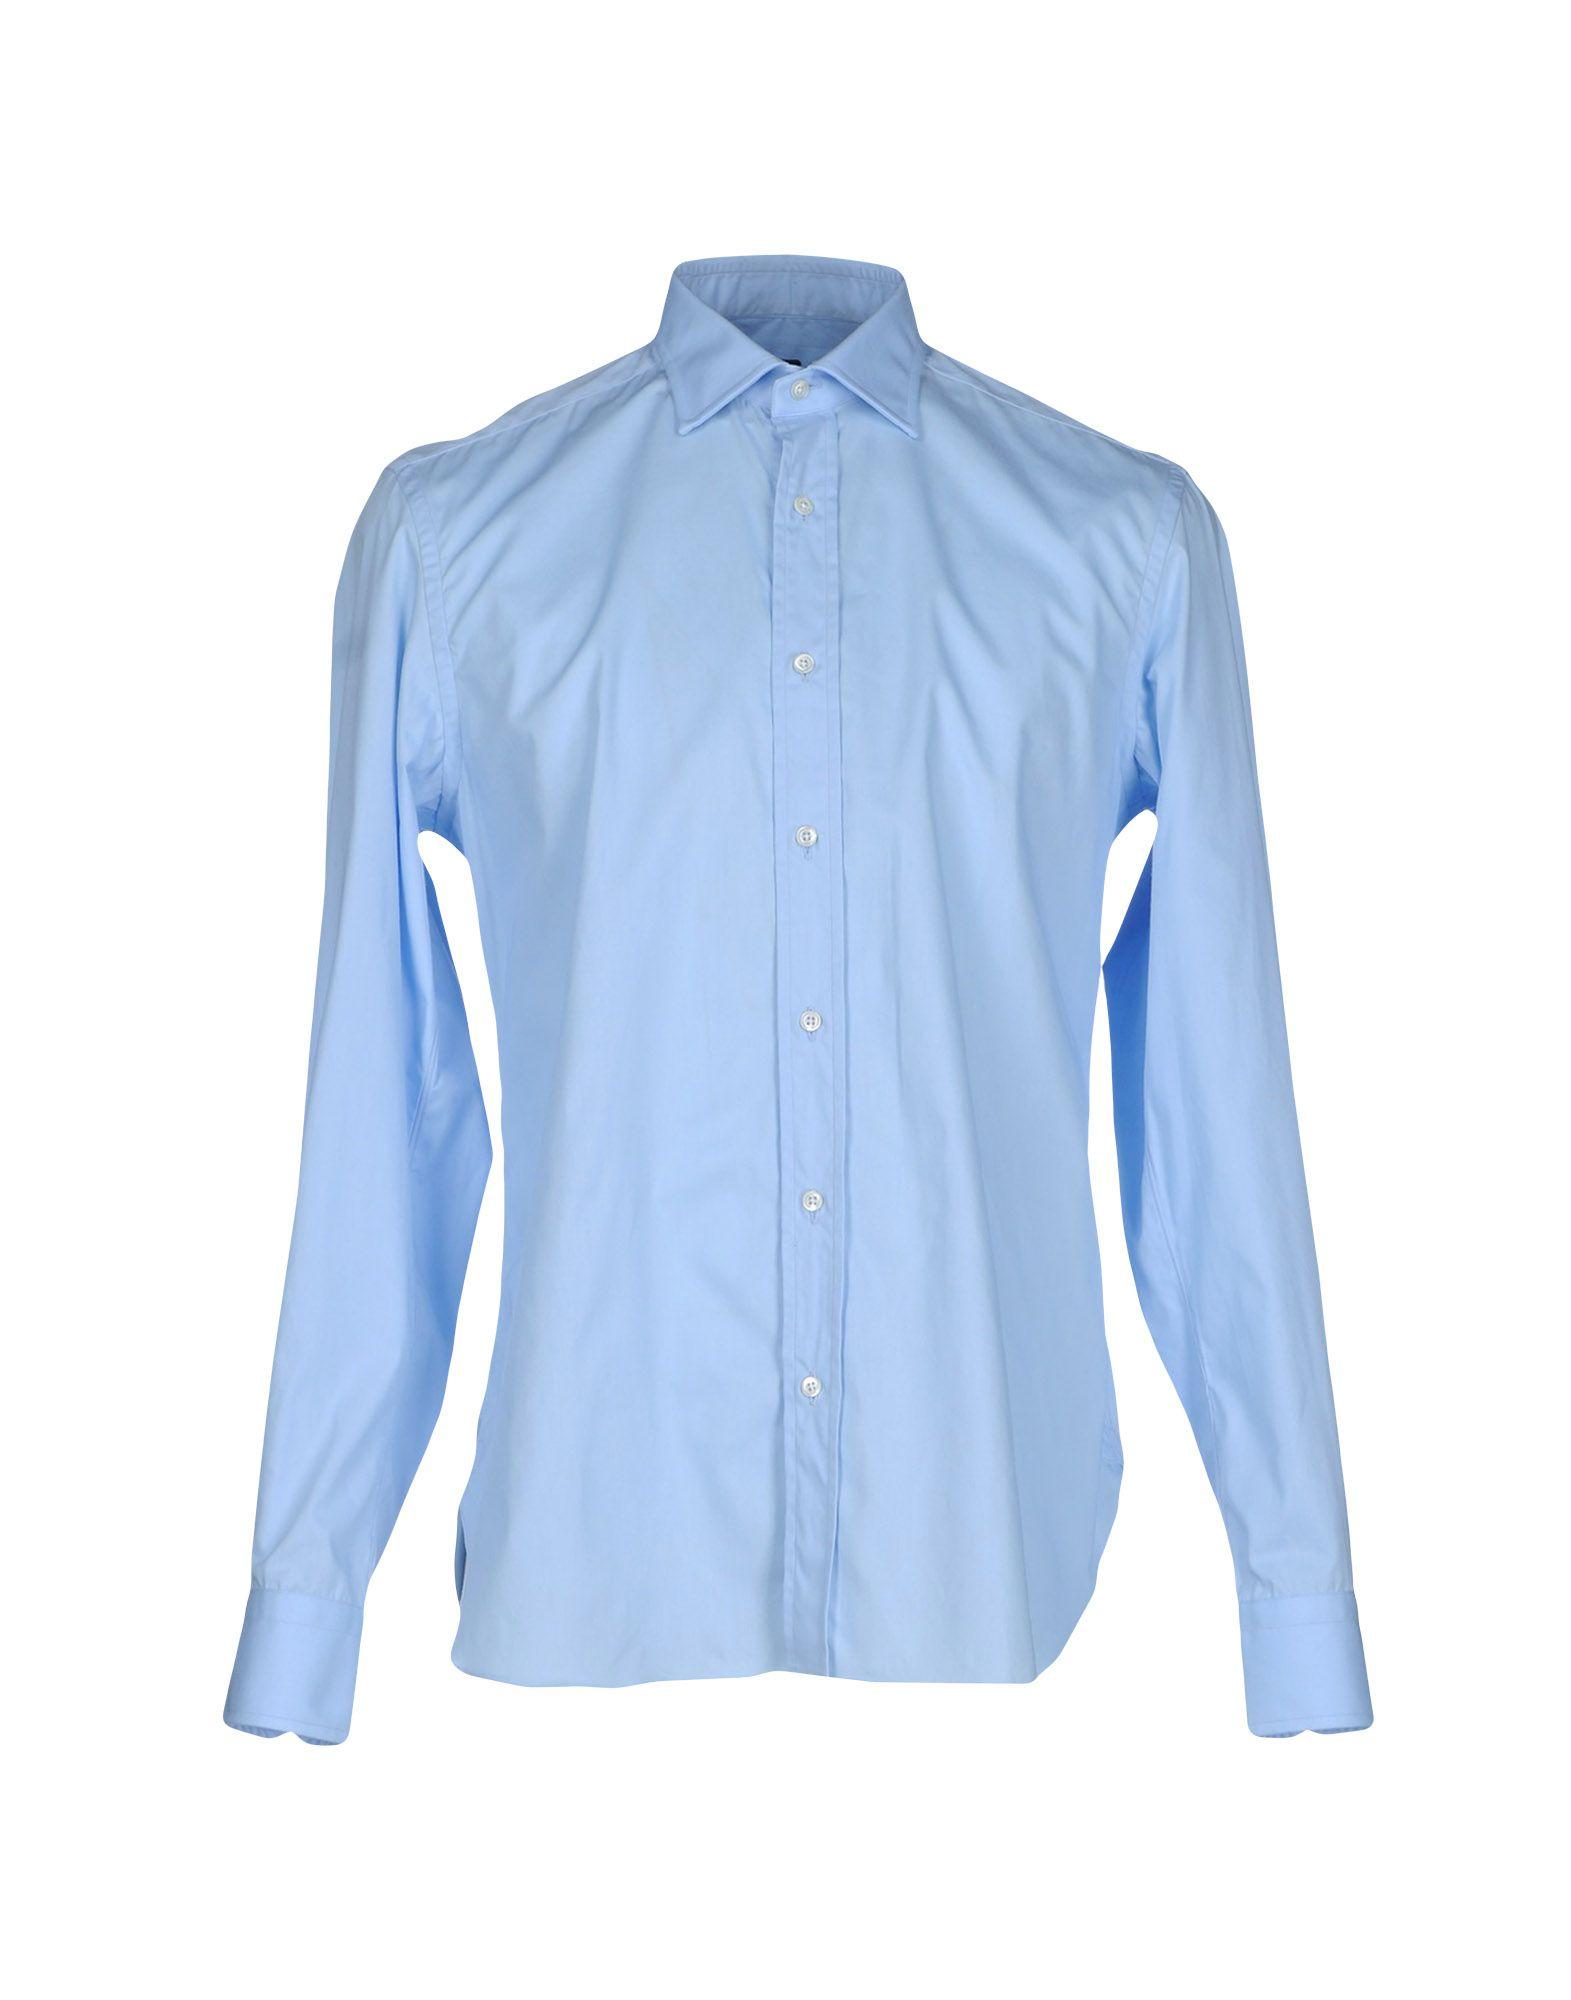 Mp Massimo Piombo Cotton Shirt in Sky Blue (Blue) for Men - Lyst